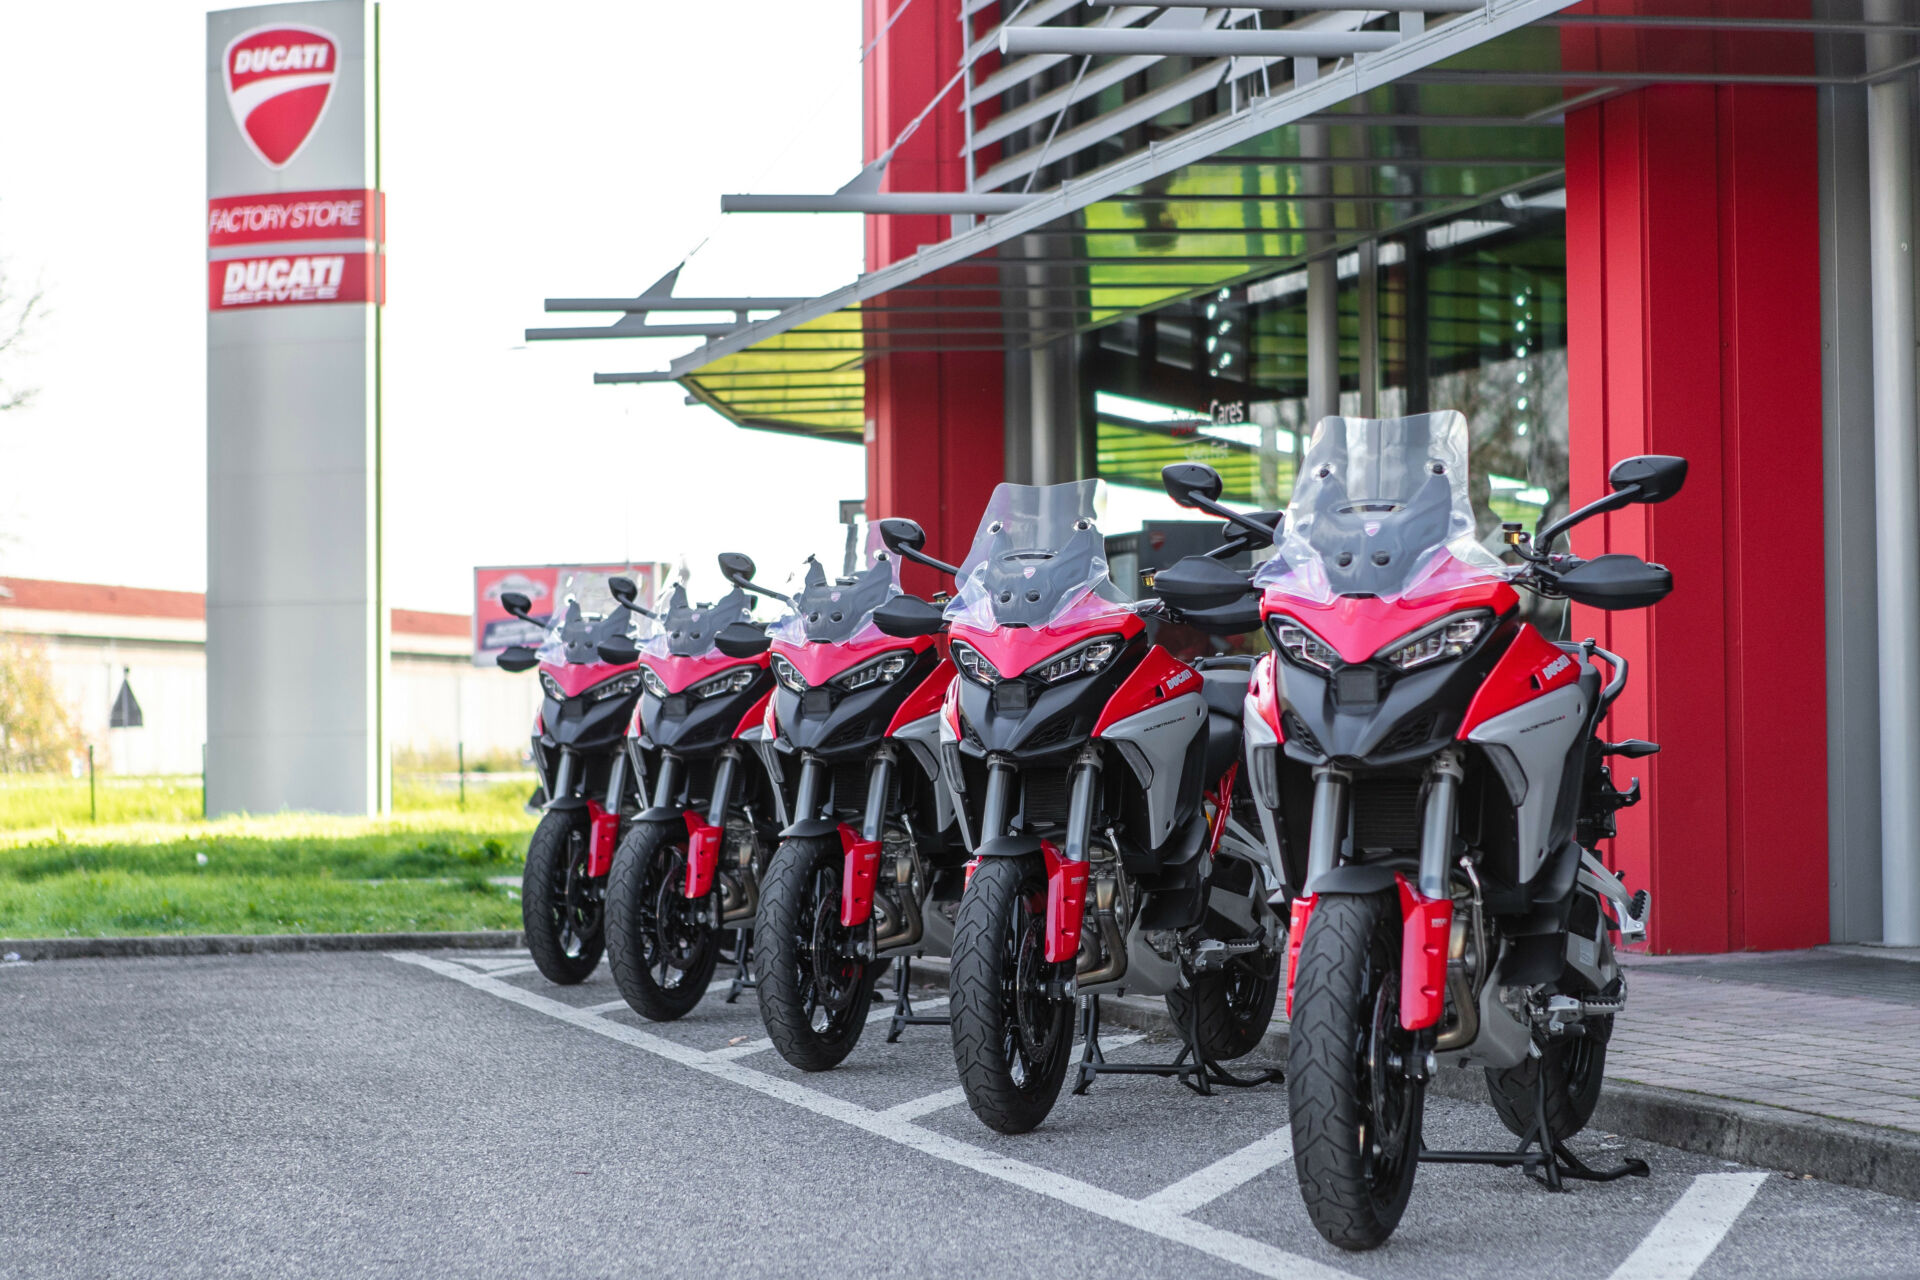 The Multistrada V4 was Ducati's best-selling model during the first quarter of 2022. Photo courtesy Ducati.